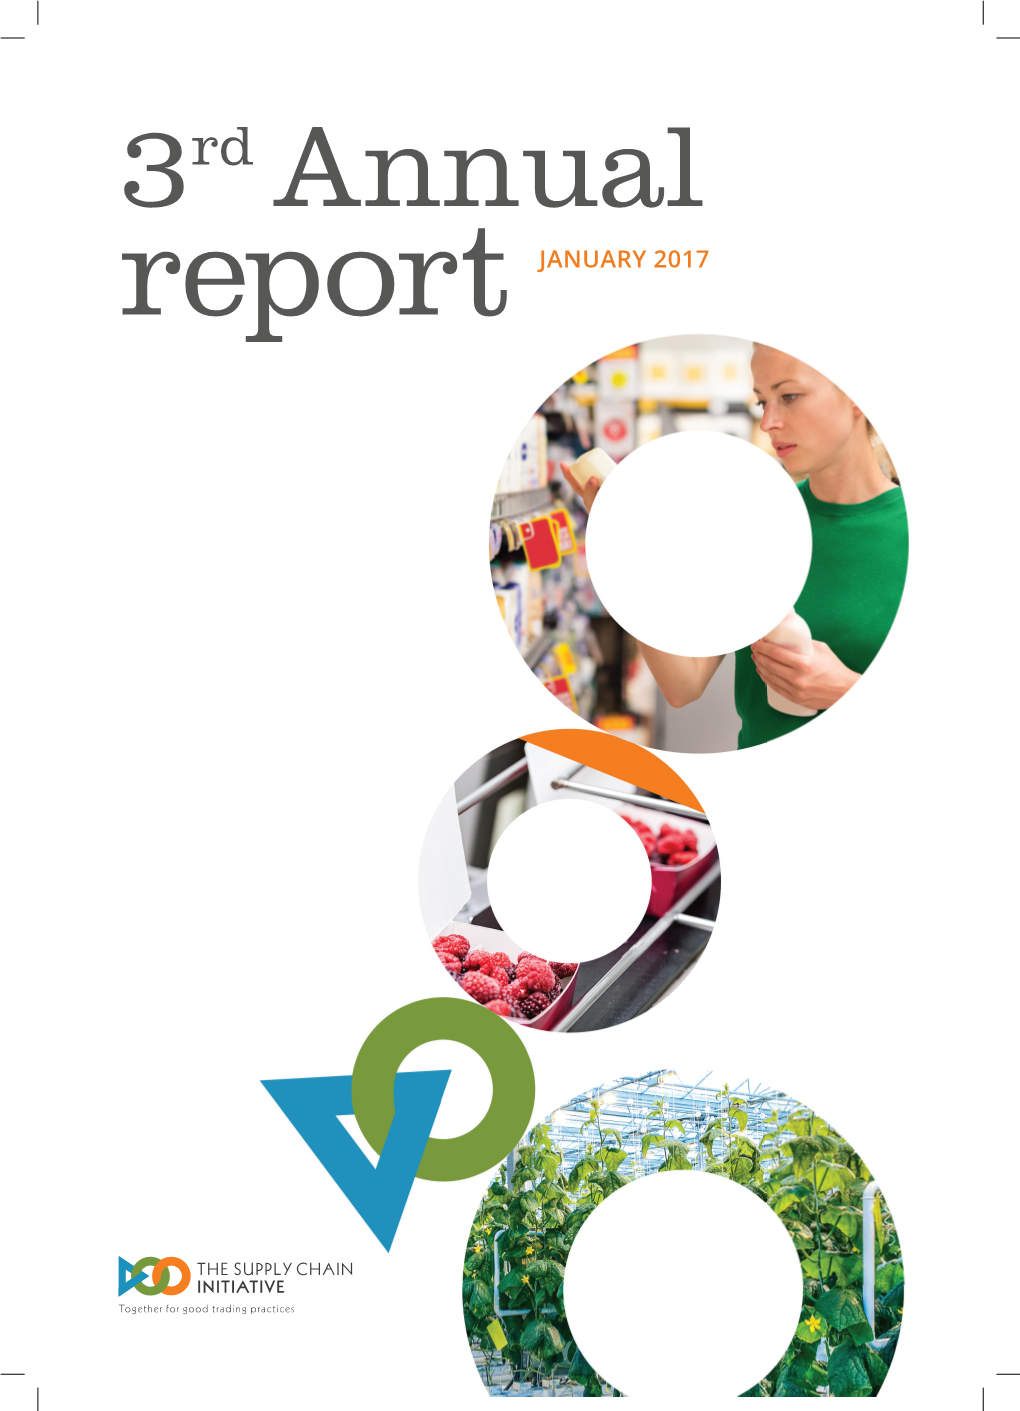 3Rd Annual Report JANUARY 2017